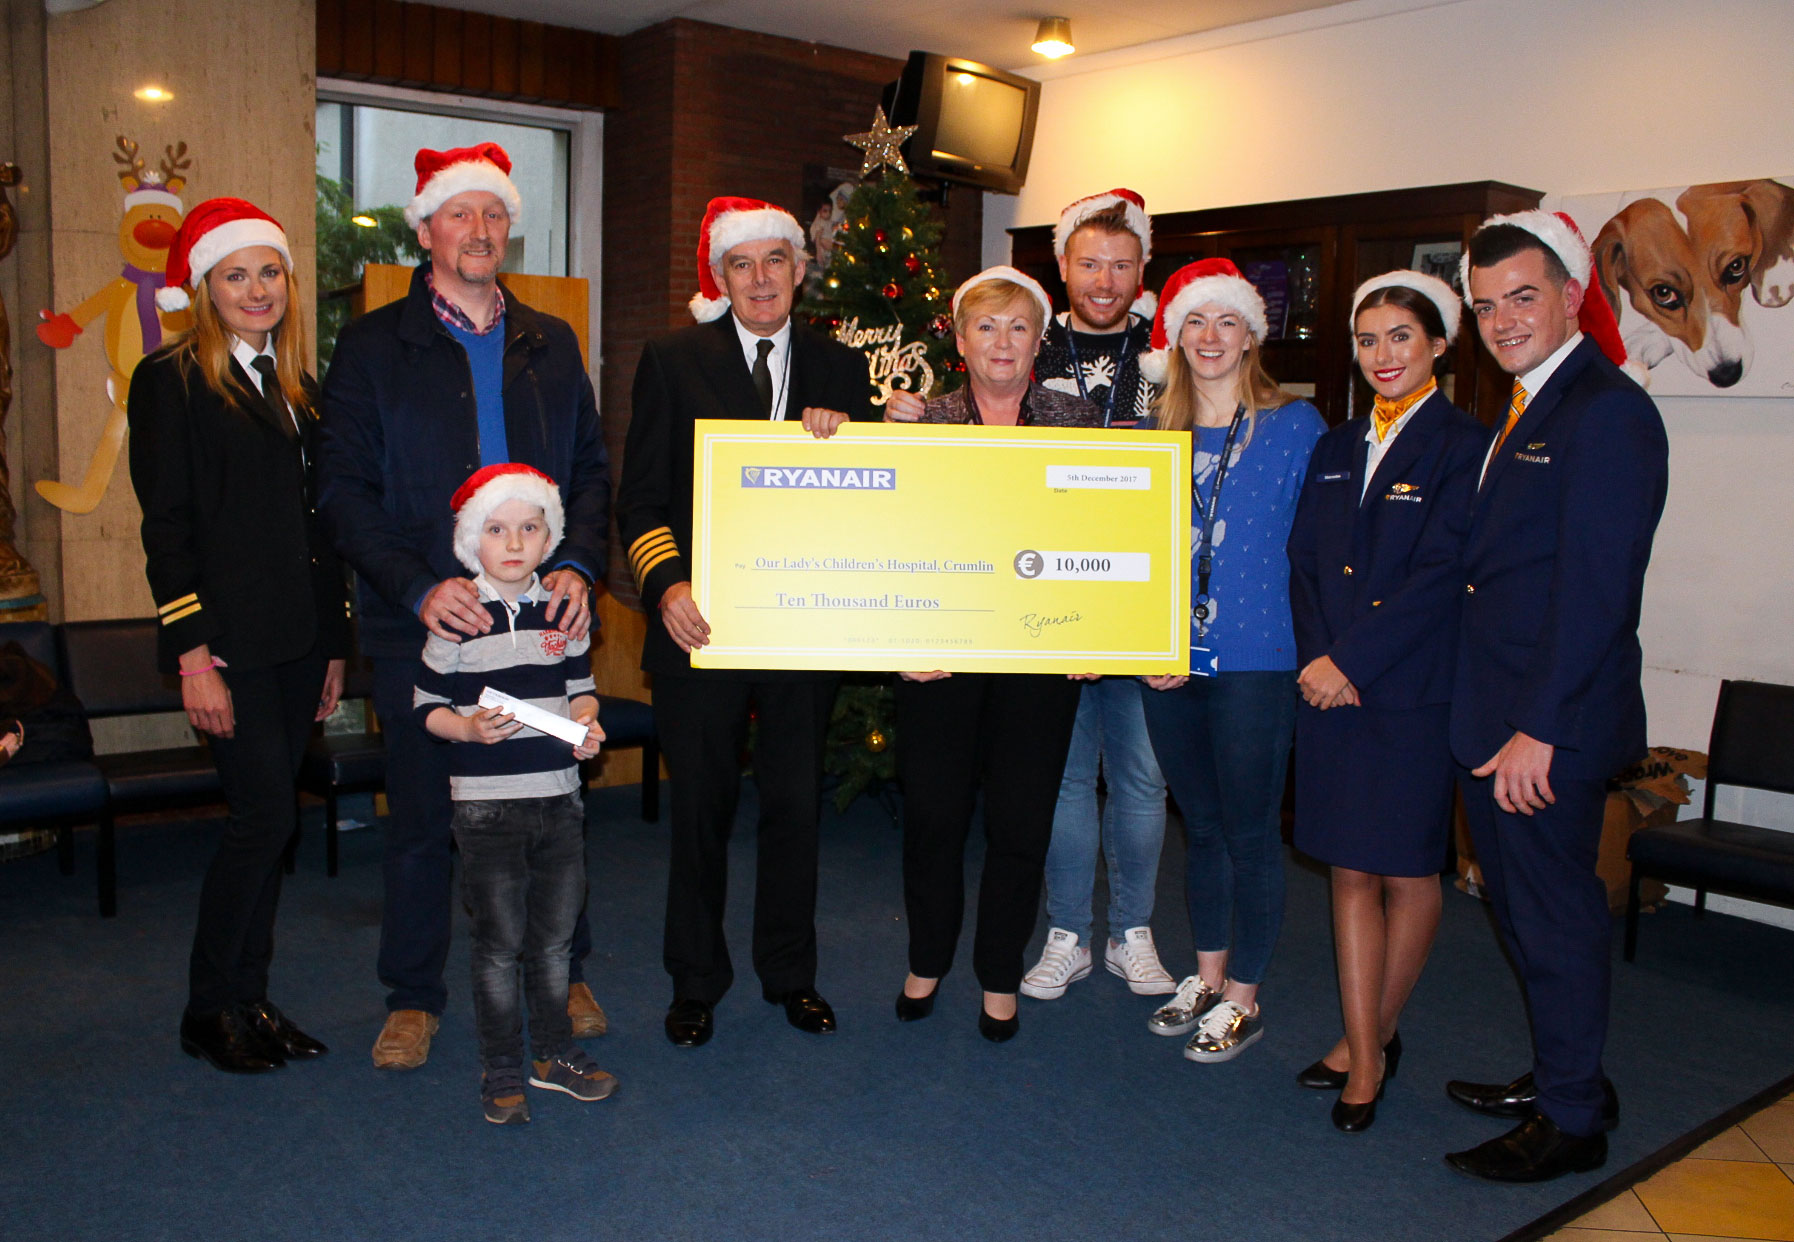 €10,000 Donated To Our Lady’s Children’s Hospital